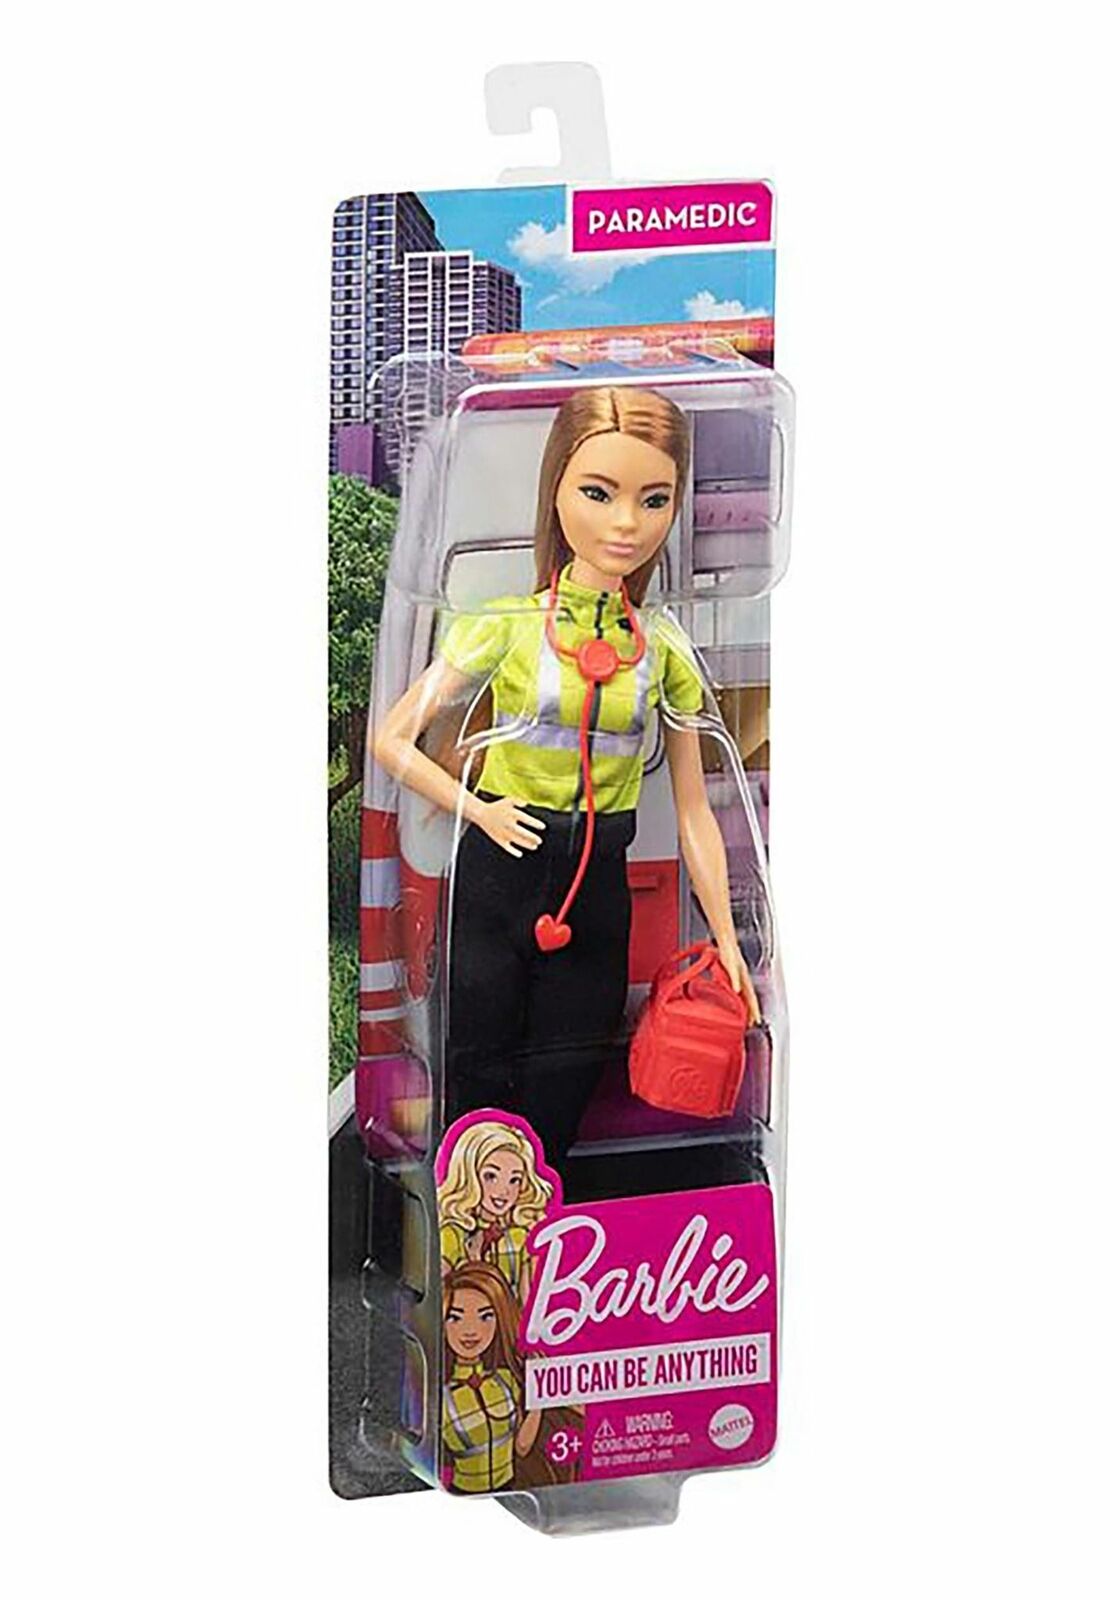 BARBIE PARAMEDIC DOLL~You Can Be Anything COLLECTION